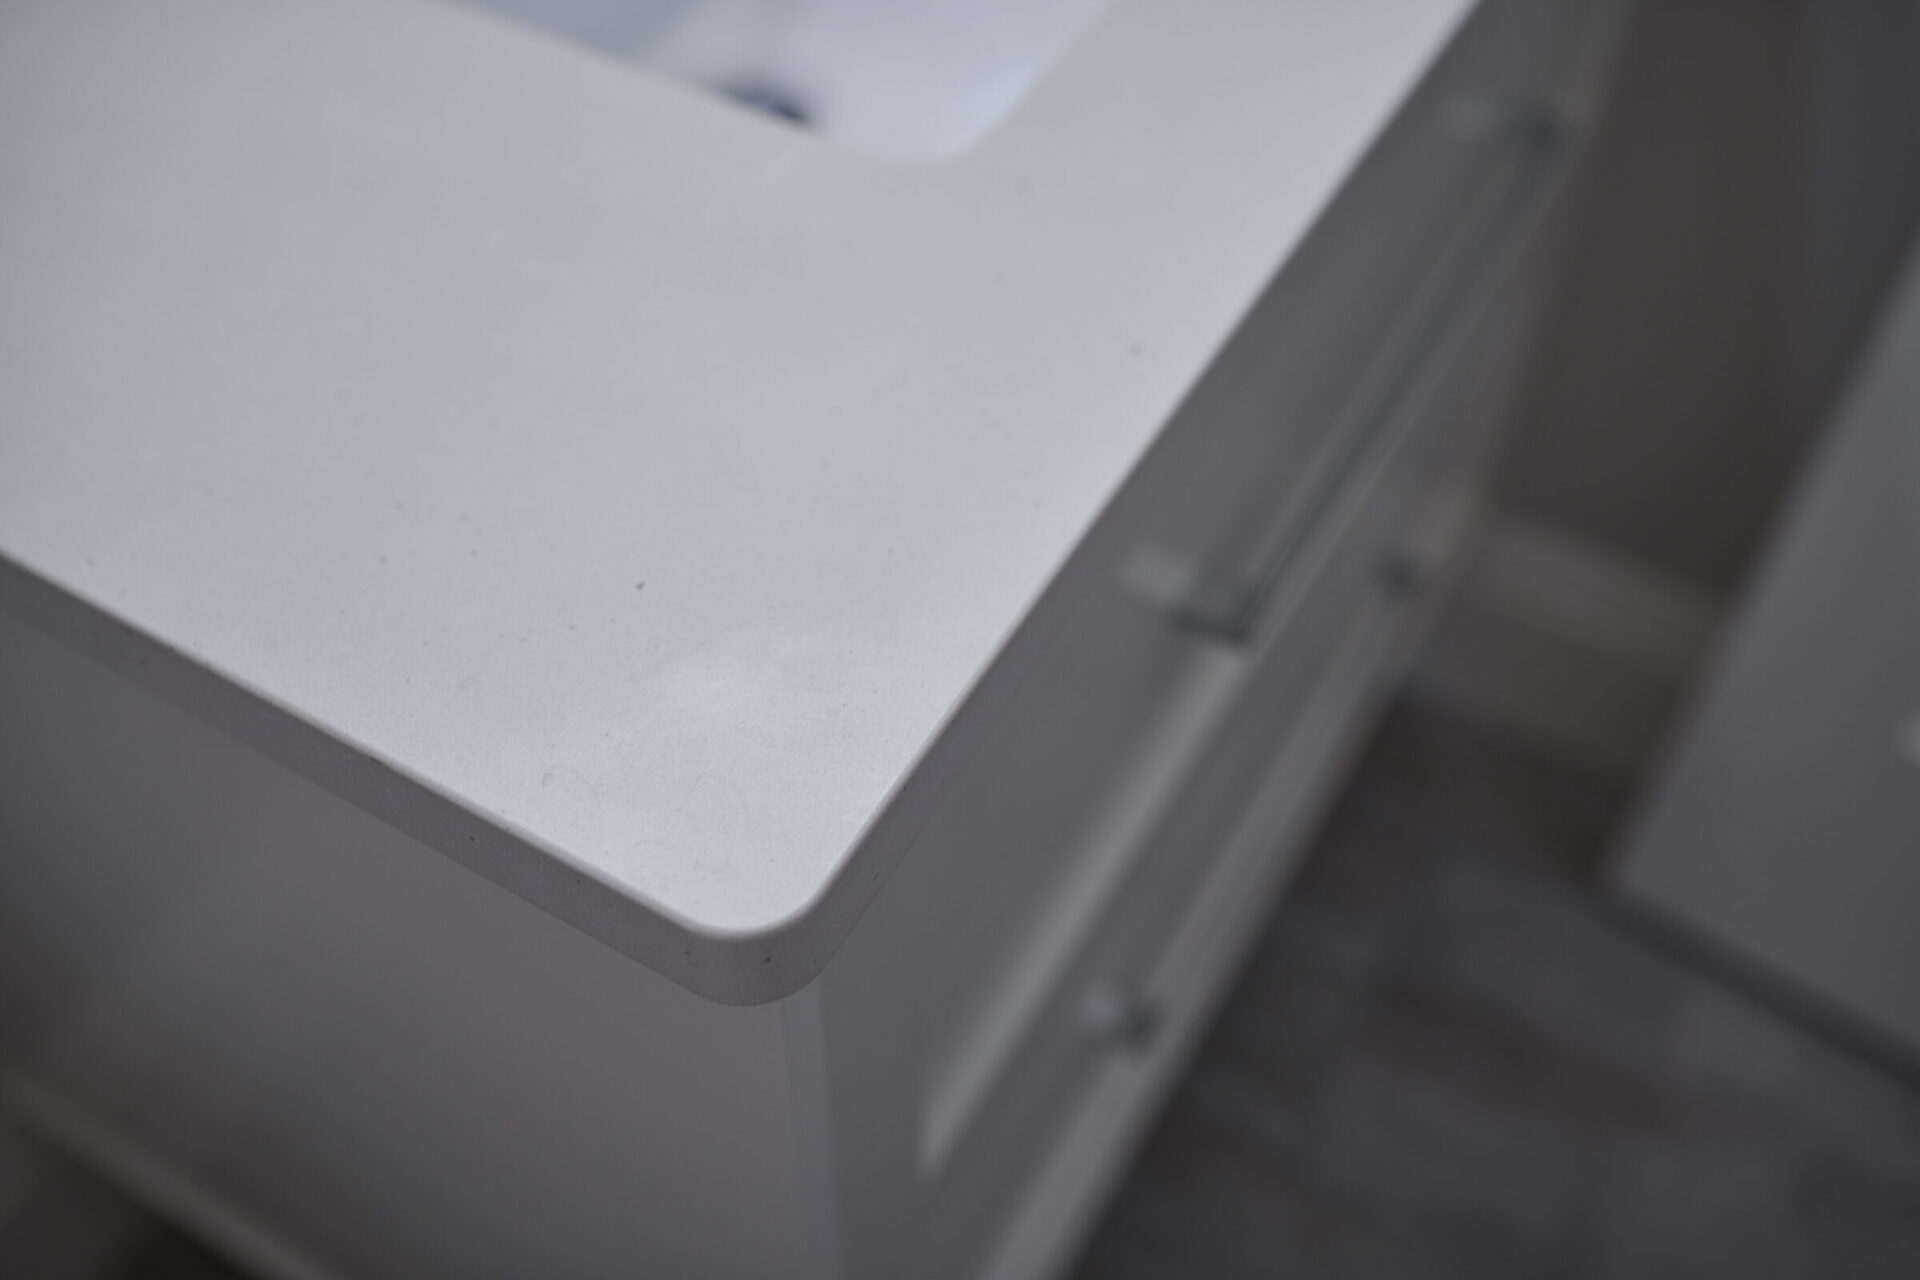 The image shows a close-up of a white countertop with a blurred background featuring grey cabinets, highlighting texture and subtle imperfections on the surface.